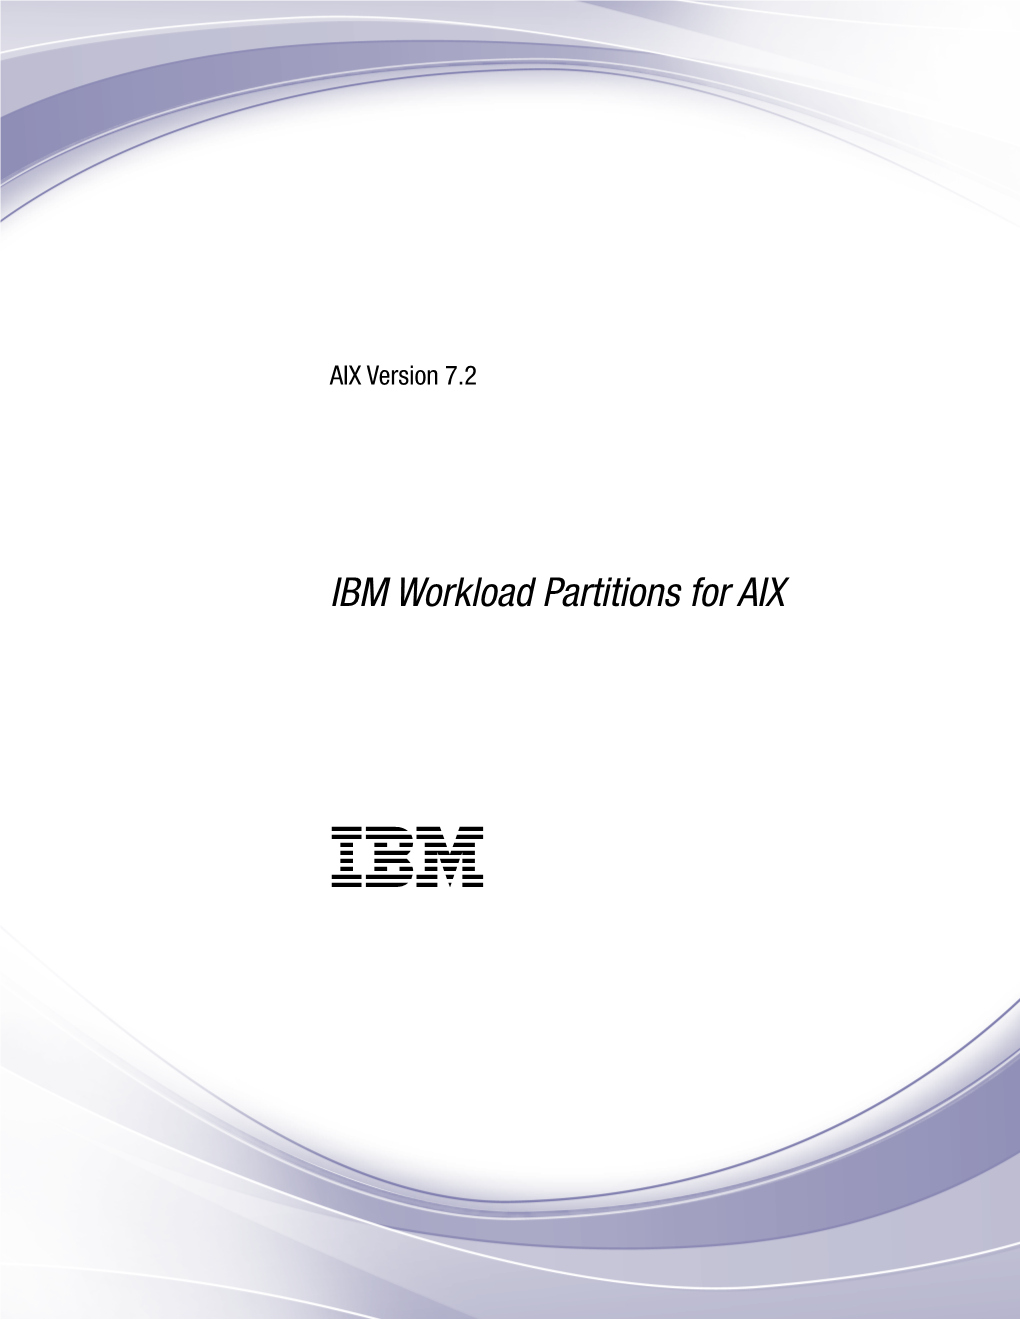 AIX Version 7.2: IBM Workload Partitions for AIX About This Document